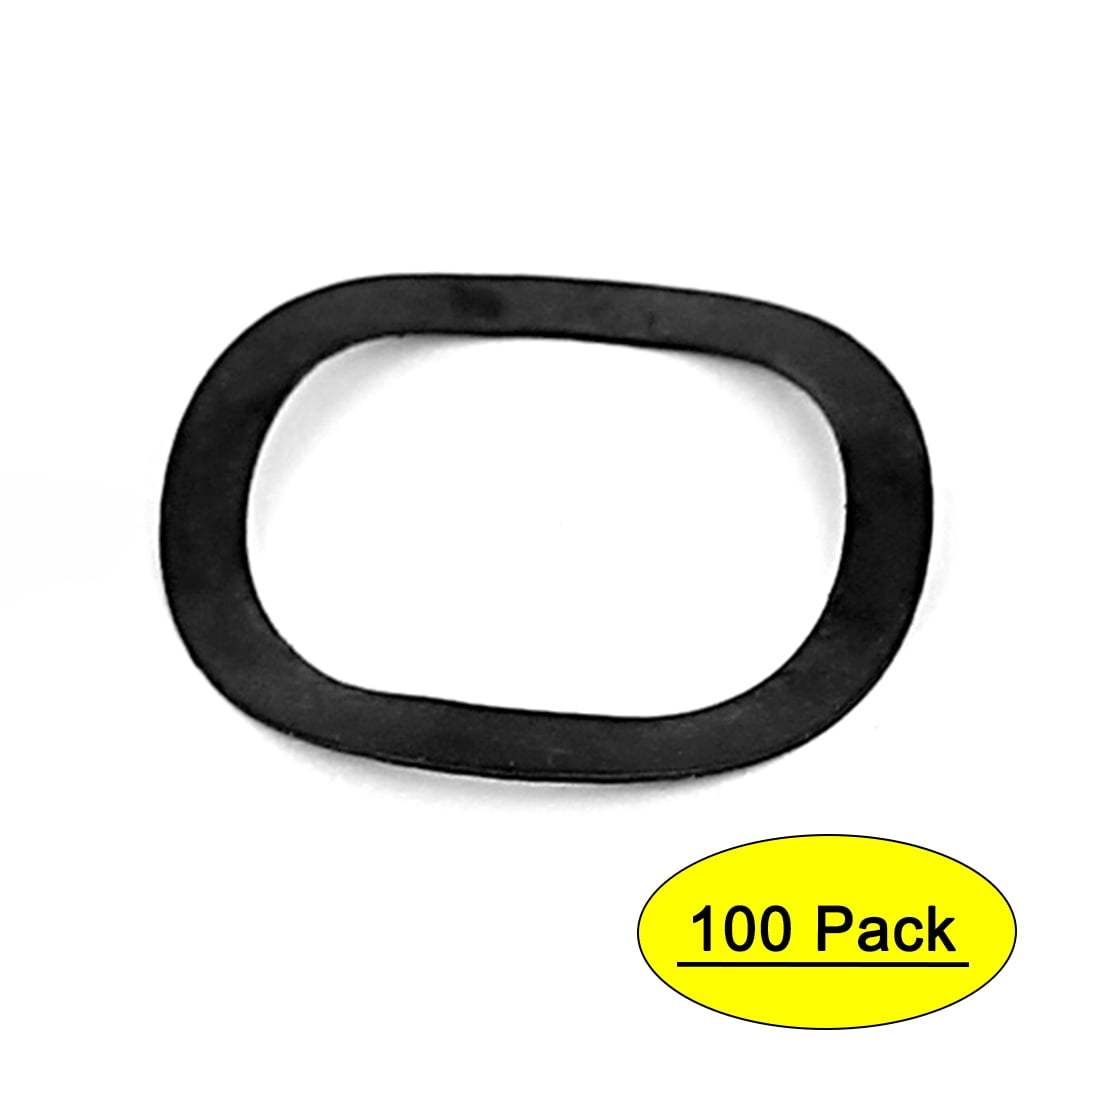 Pack of 100 M16 Spring Washers Heavy Duty 